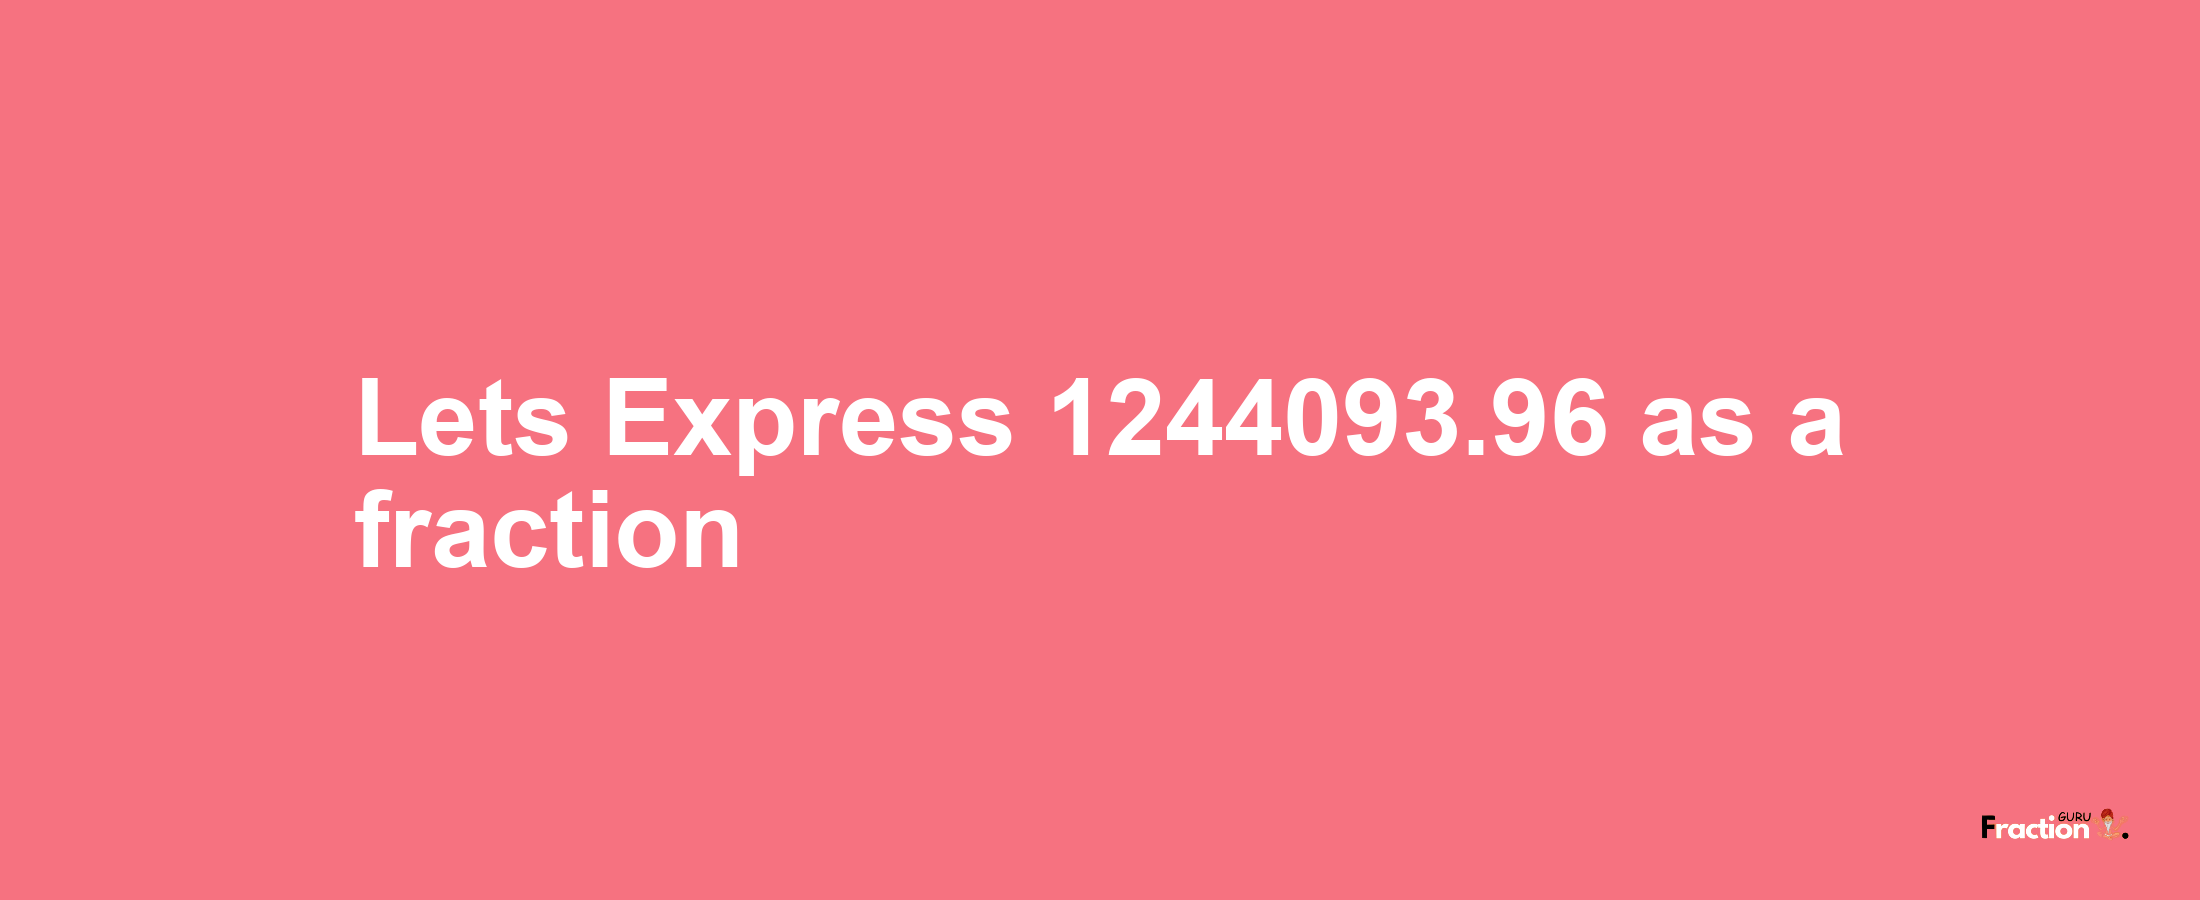 Lets Express 1244093.96 as afraction